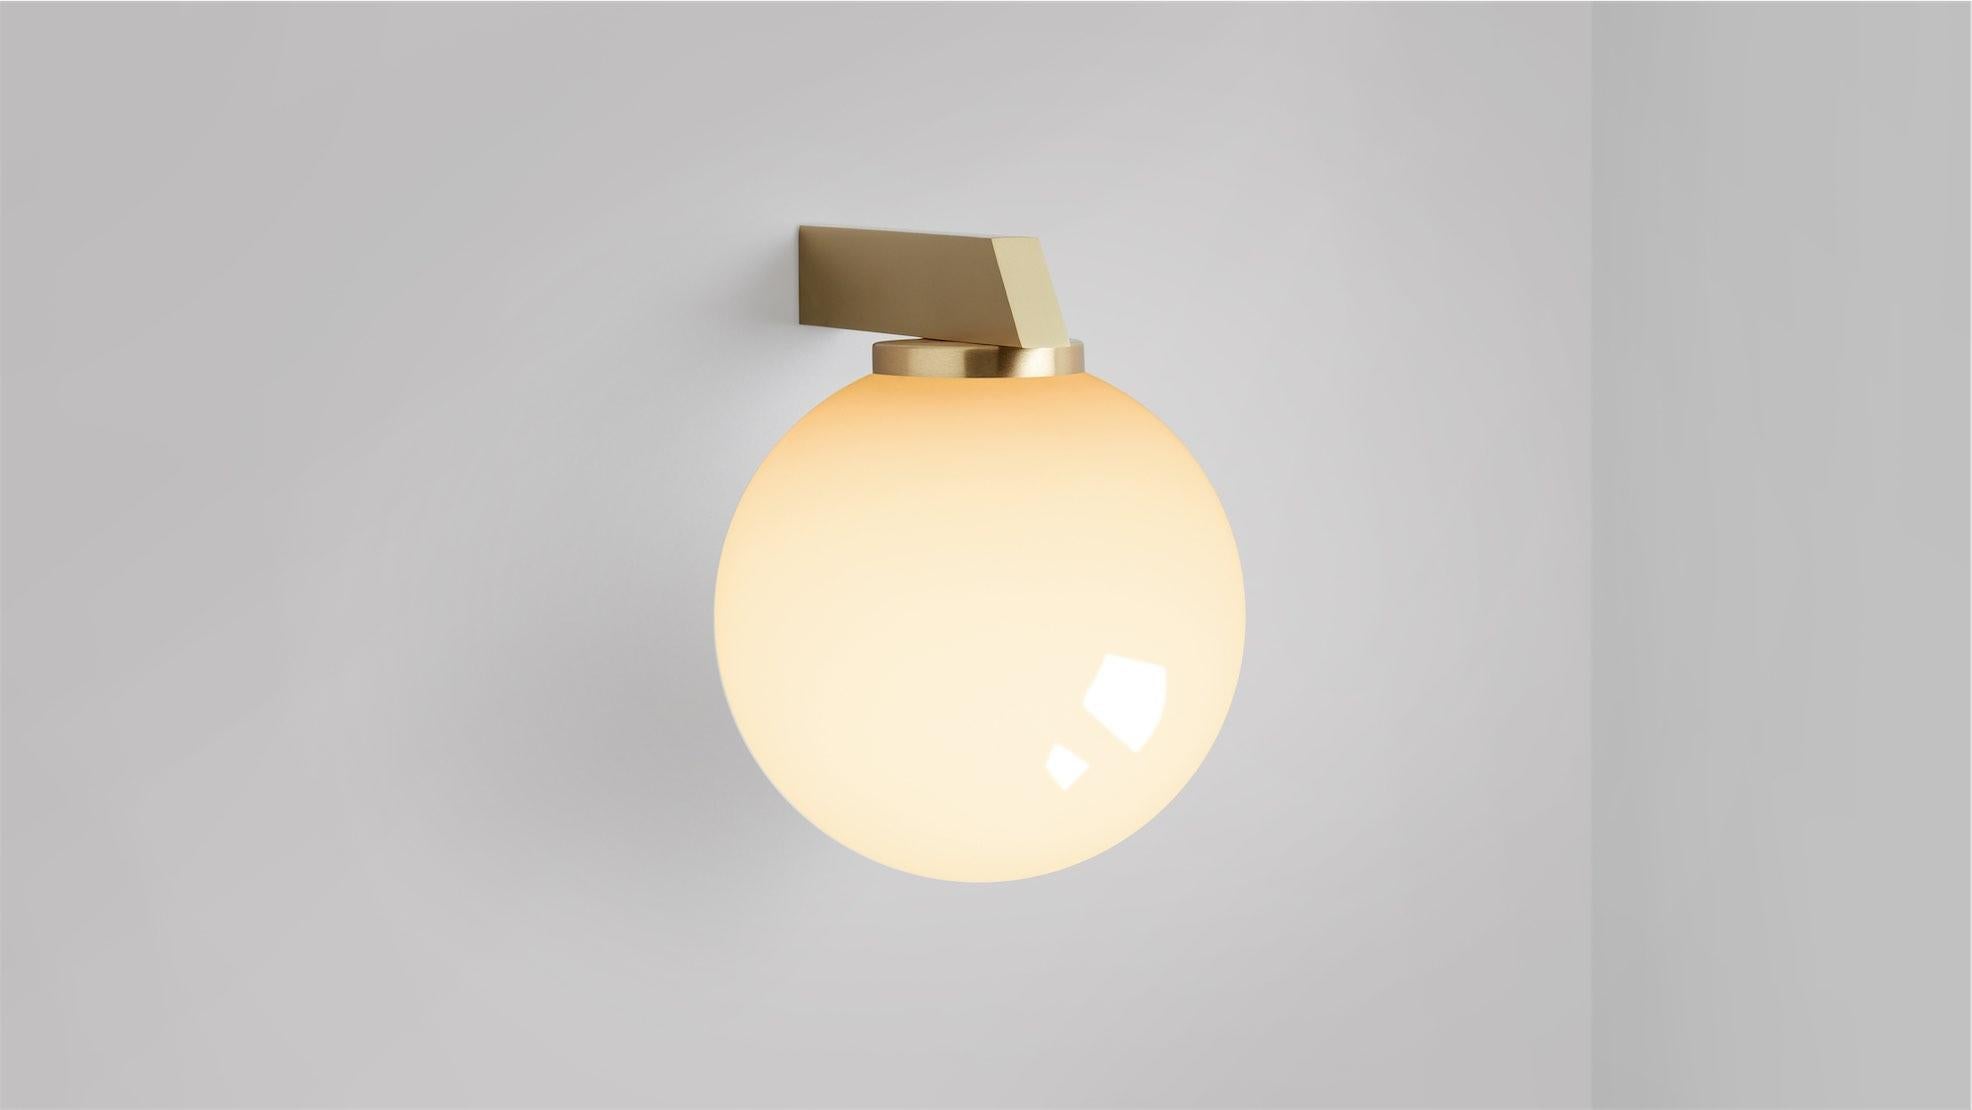 Gaia wall lamp by CTO Lighting
Materials: Satin brass with shiny opal glass.
Dimensions: D 21.4 x W 15 x H 19 cm
Available in bronze or satin brass and in hand shaped smoke glass, matte opal glass, shiny opal glass, or tinted glass. Please contact